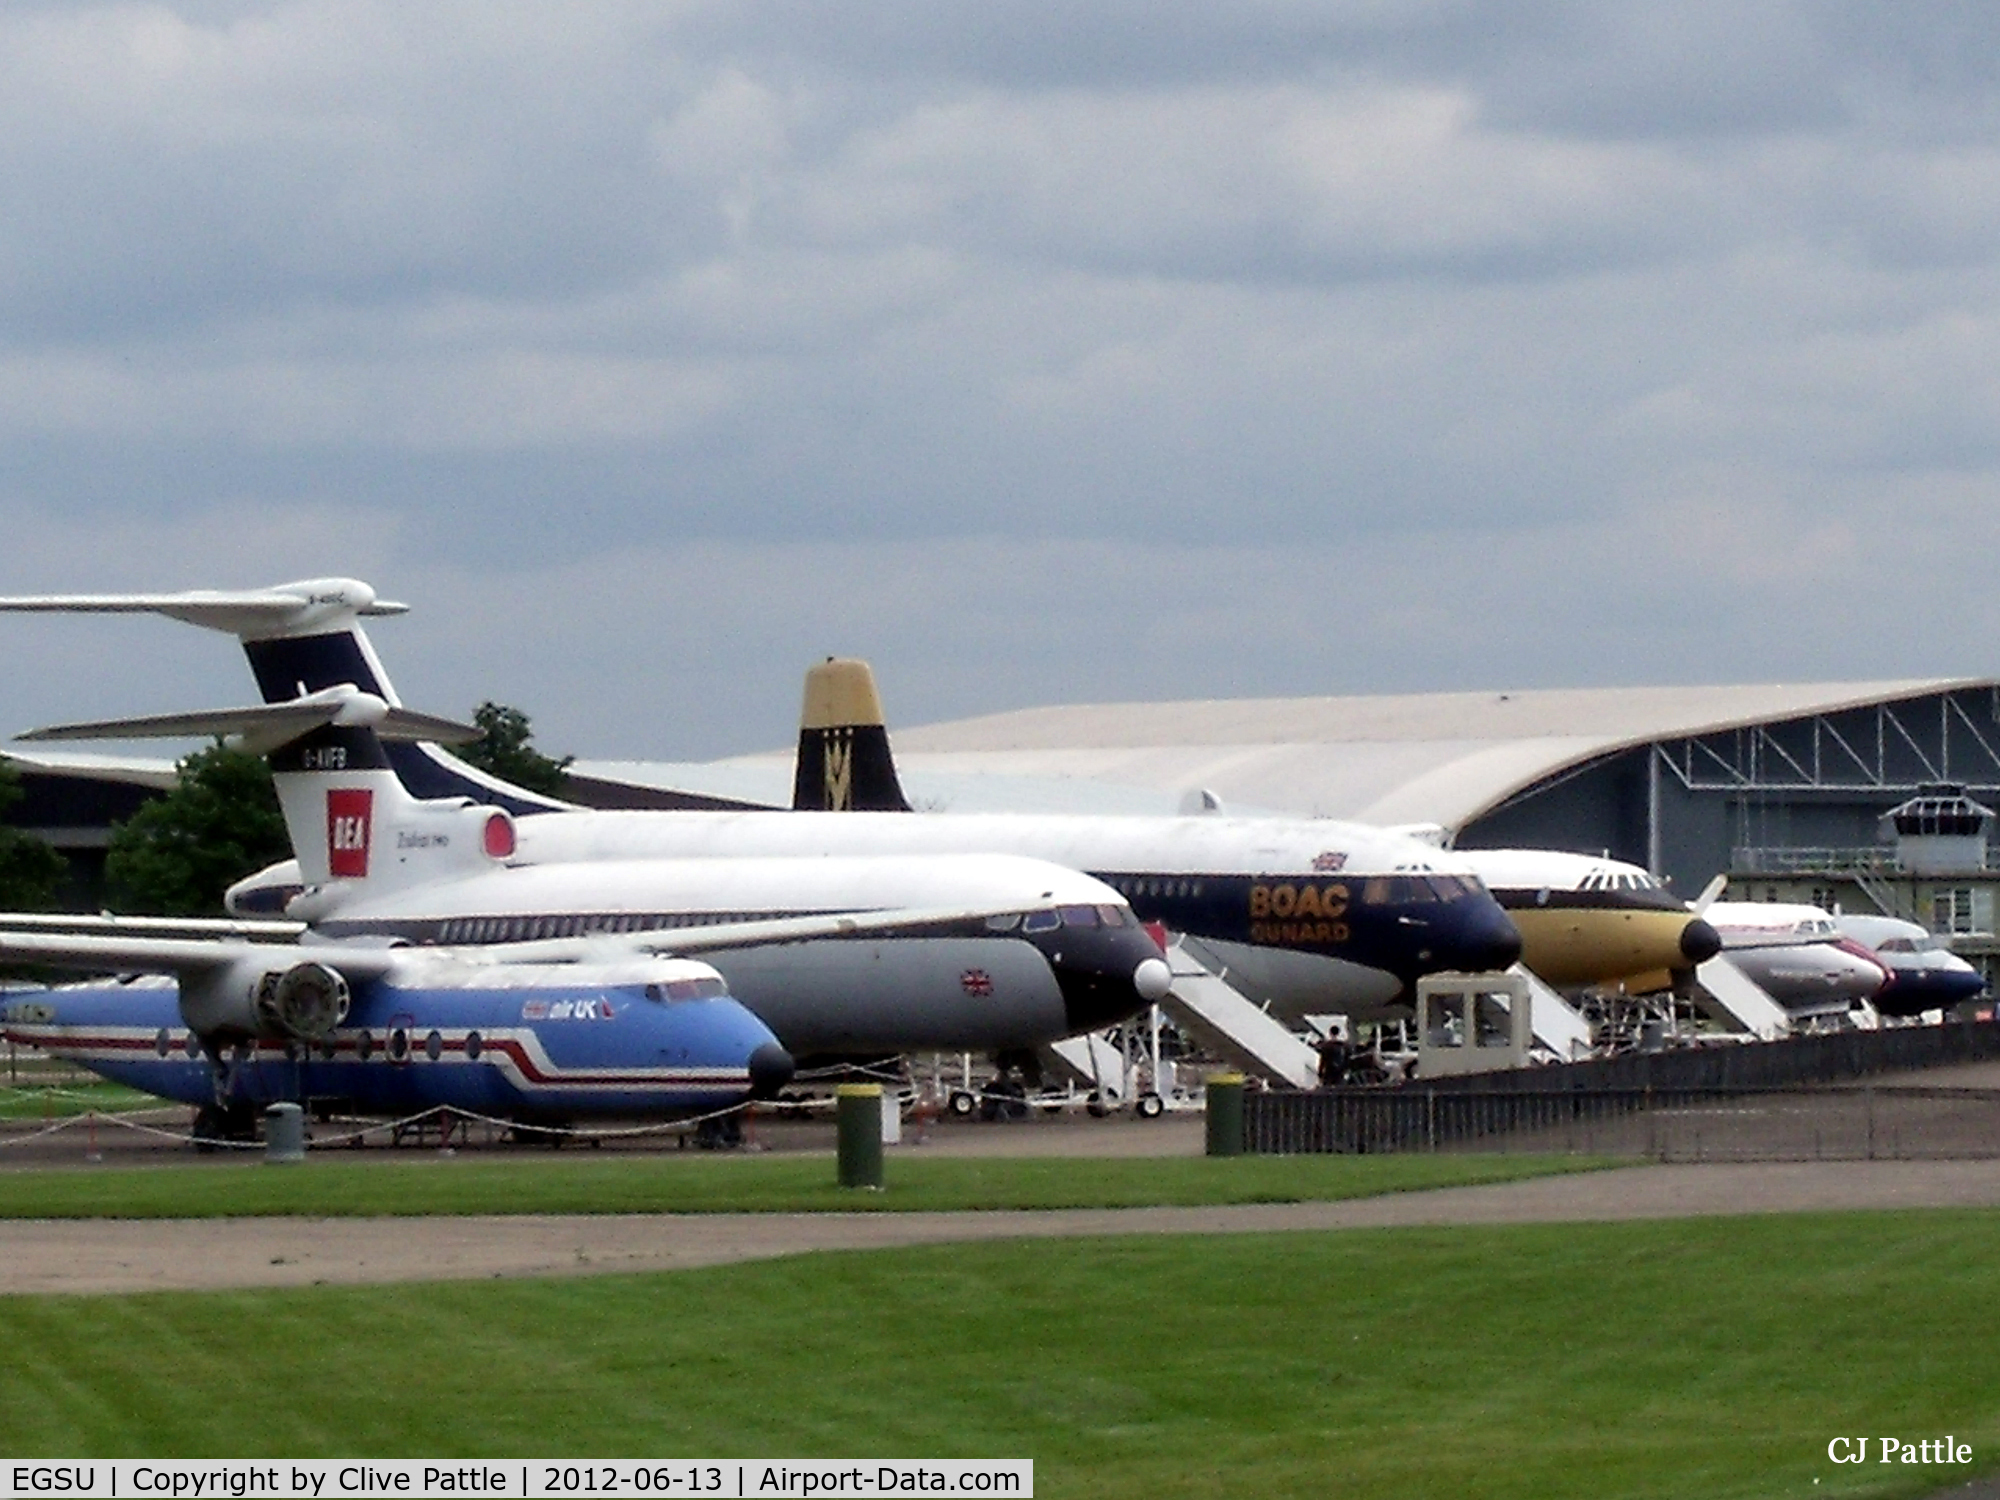 Duxford Airport, Cambridge, England United Kingdom (EGSU) - Historical Airliner display line-up at the IWM Duxford, including HP Herald, DH Trident, BAC VC10, Bristol Brittania and BAC 1-11.